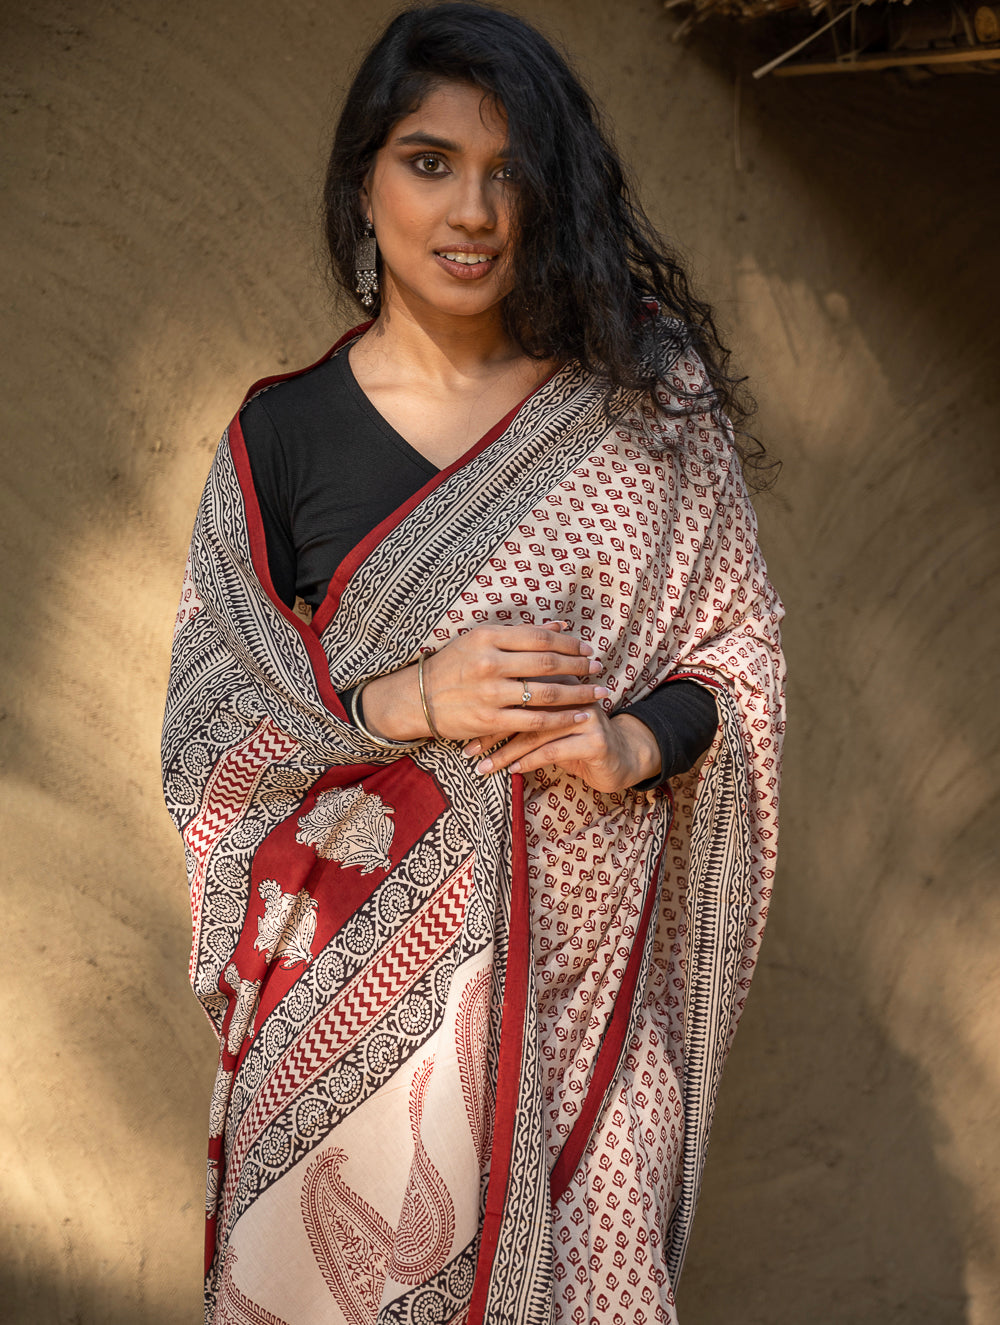 Load image into Gallery viewer, Exclusive Bagh Hand Block Printed Cotton Saree - Floret Buds